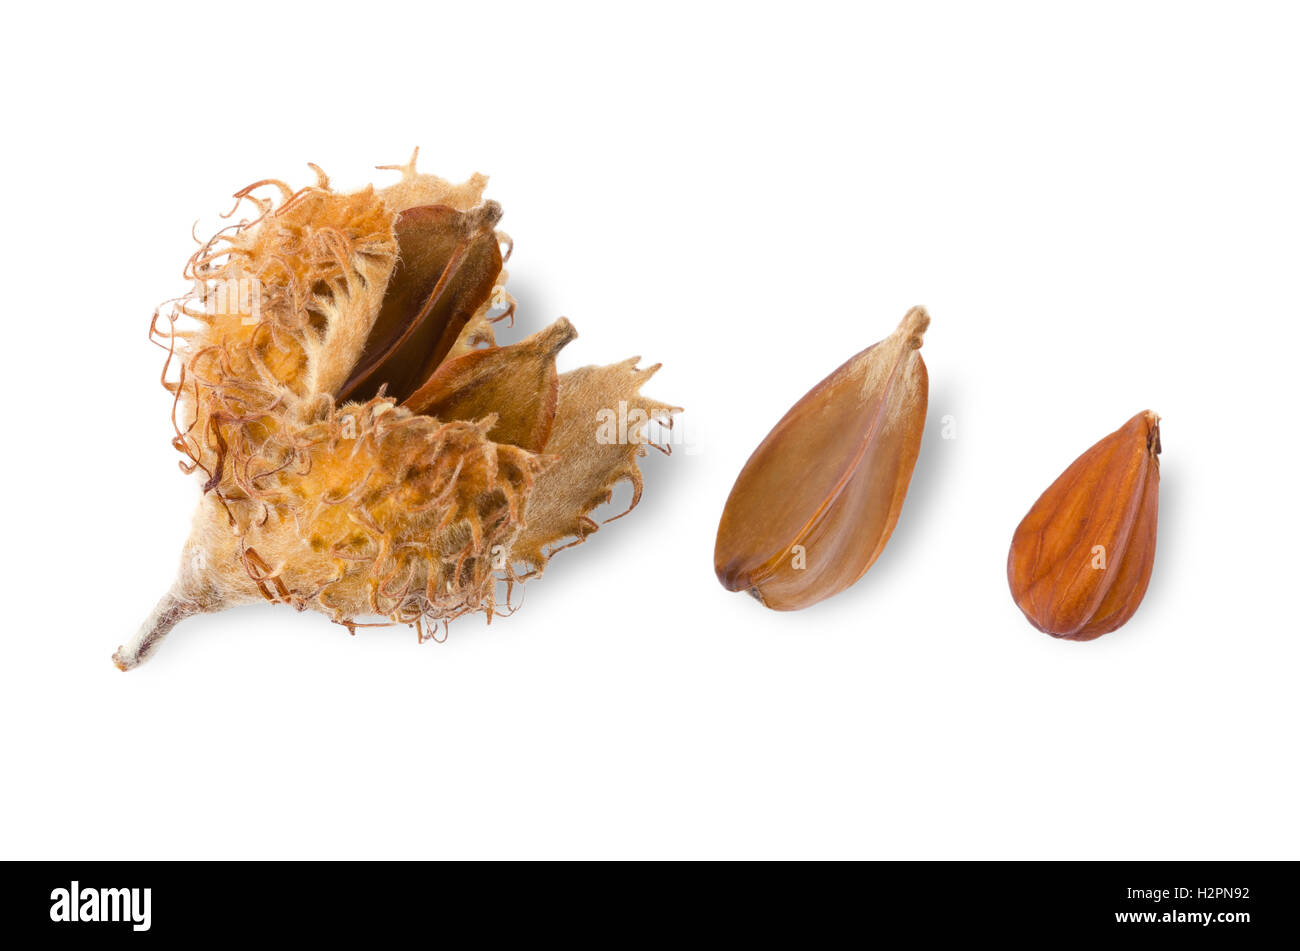 European beechnuts on white background, also called mast. Burr and cupule with seeds, nut and a shelled nut of European beech. Stock Photo